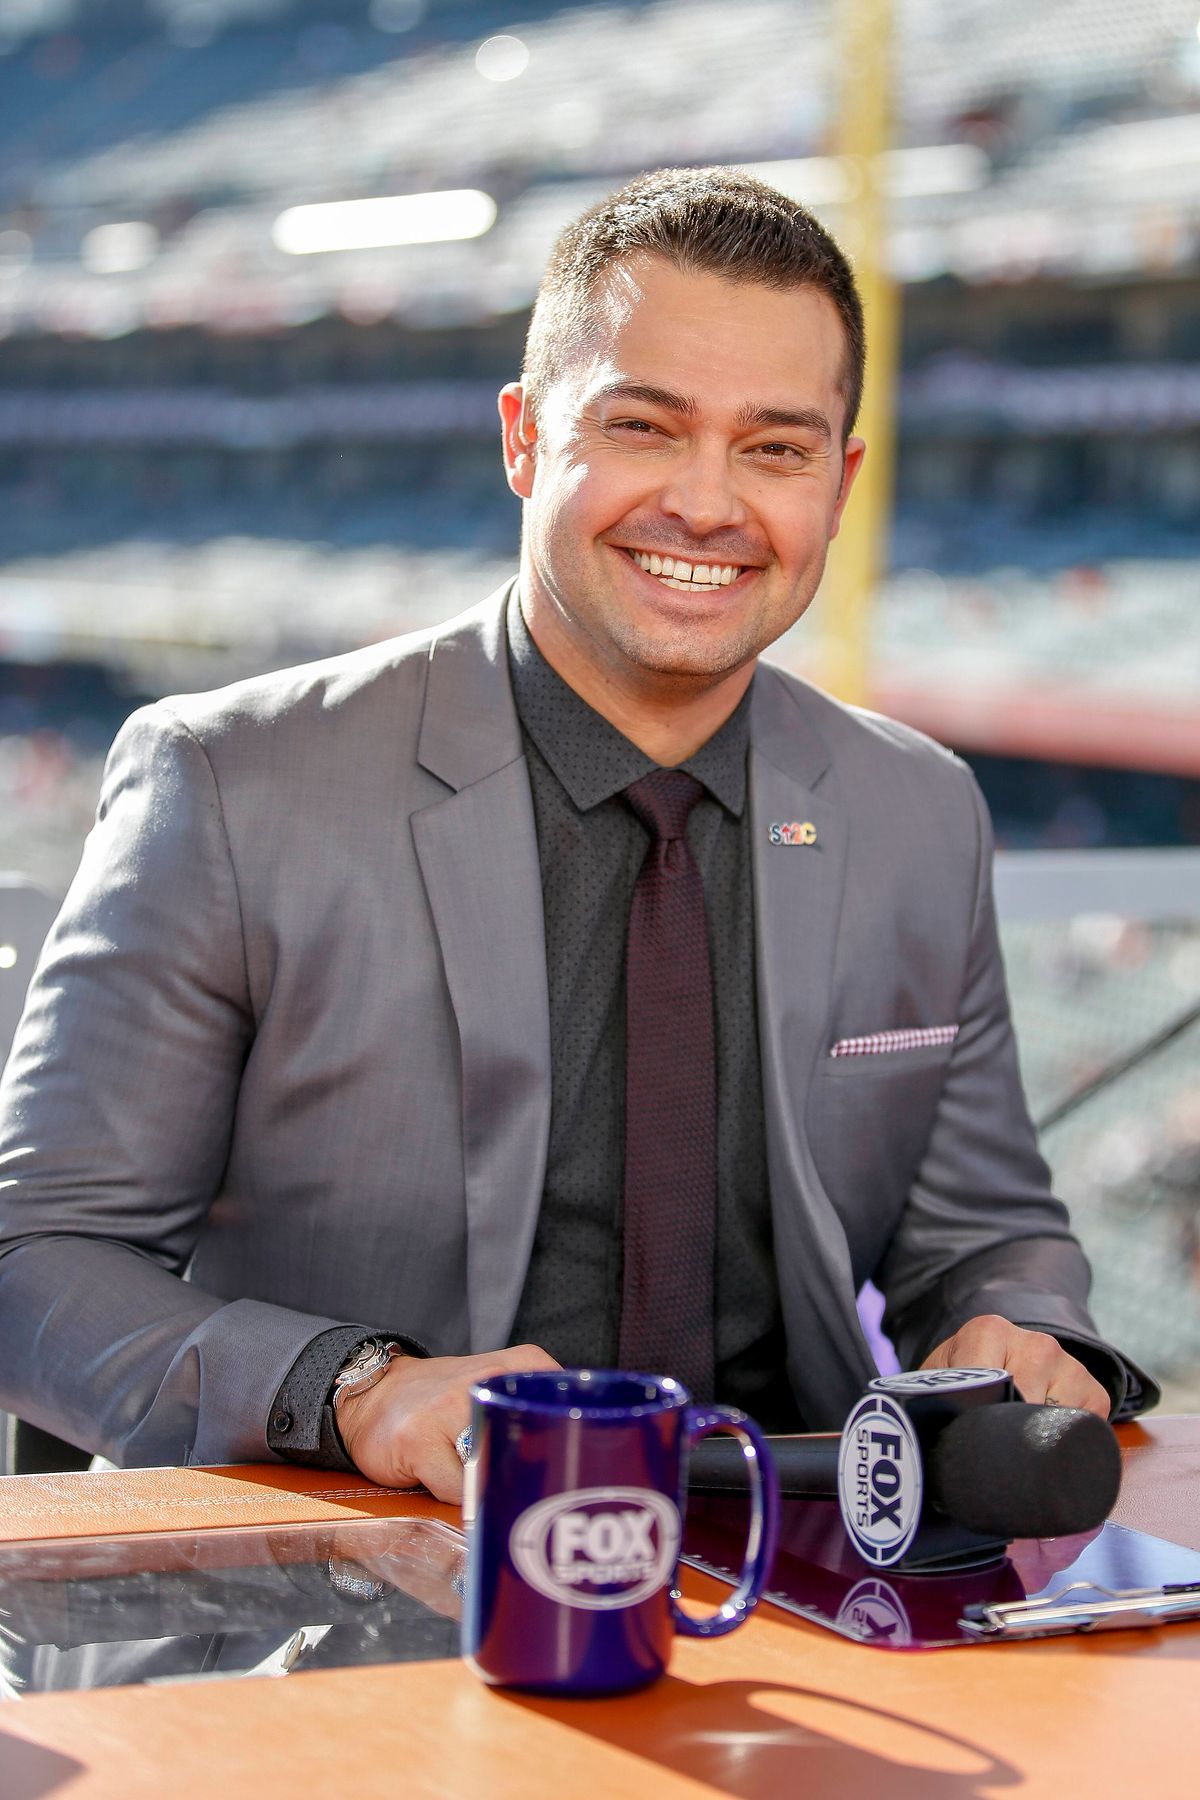 Nick Swisher stays upbeat as Indians falter